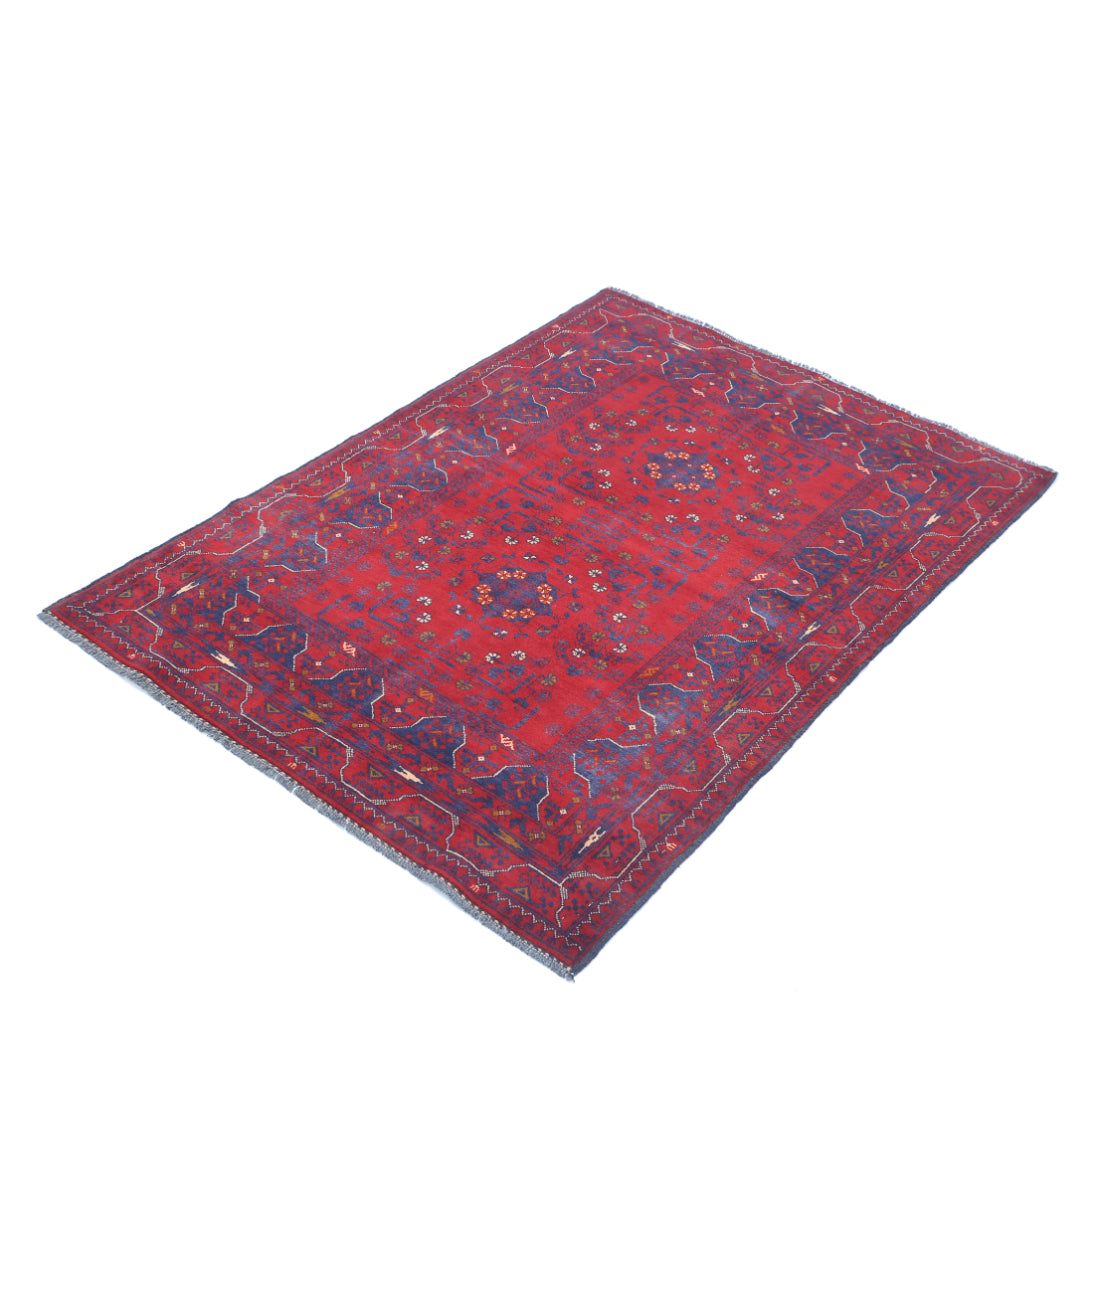 Hand Knotted Afghan Khamyab Wool Rug - 3'4'' x 4'9'' 3'4'' x 4'9'' (100 X 143) / Red / Red